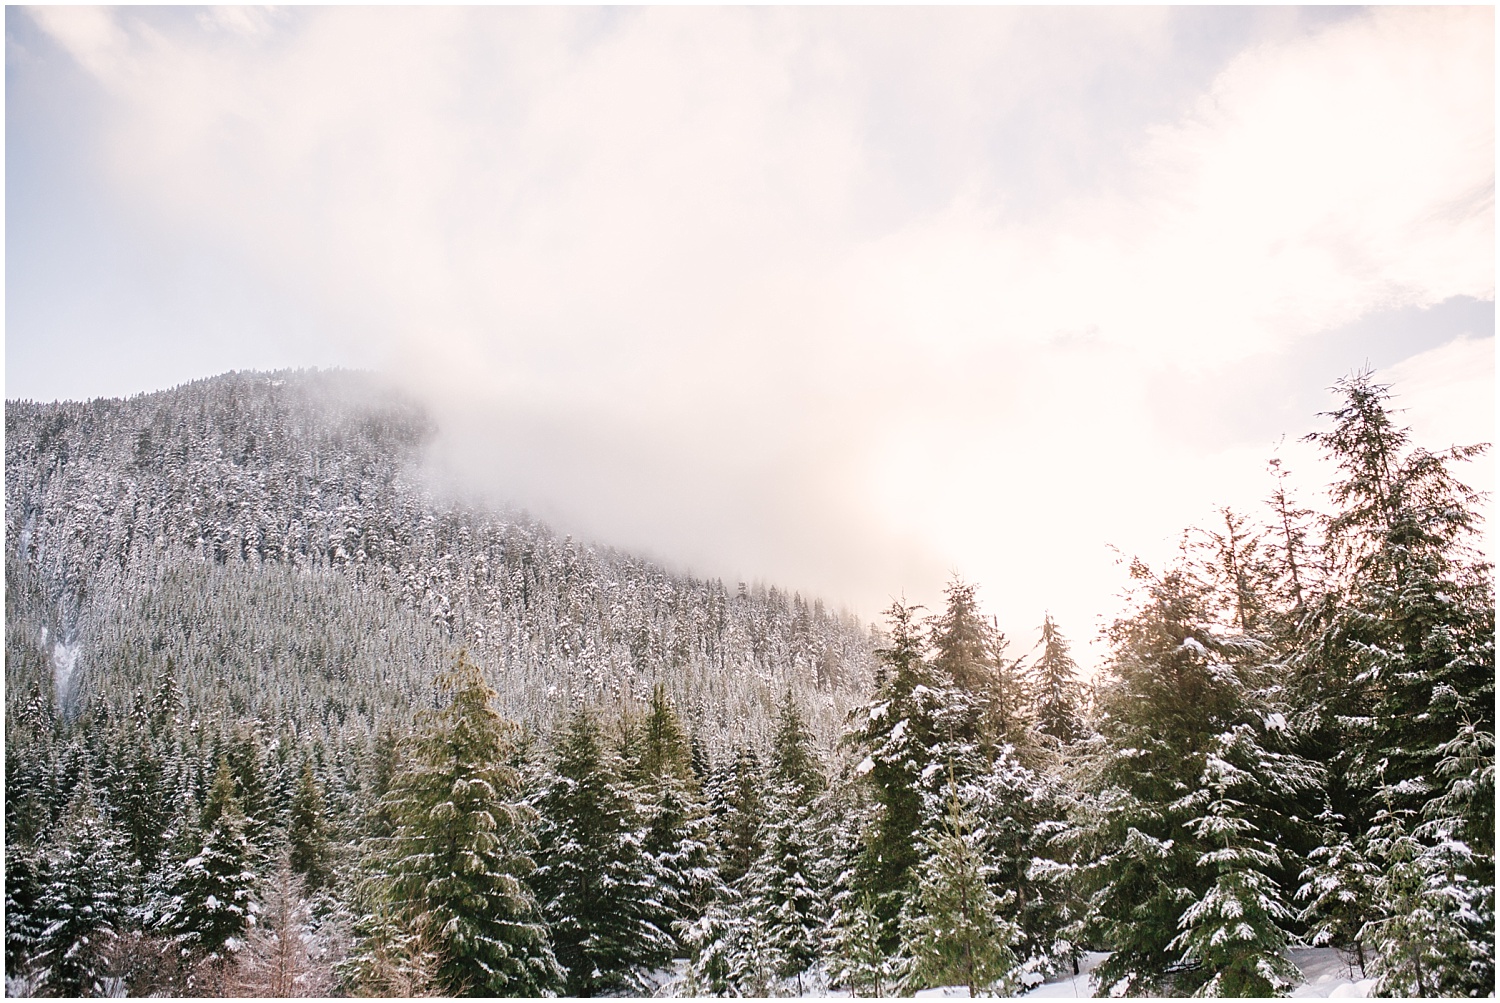 Snowy Winter Engagement Pictures at Snoqualmie Pass